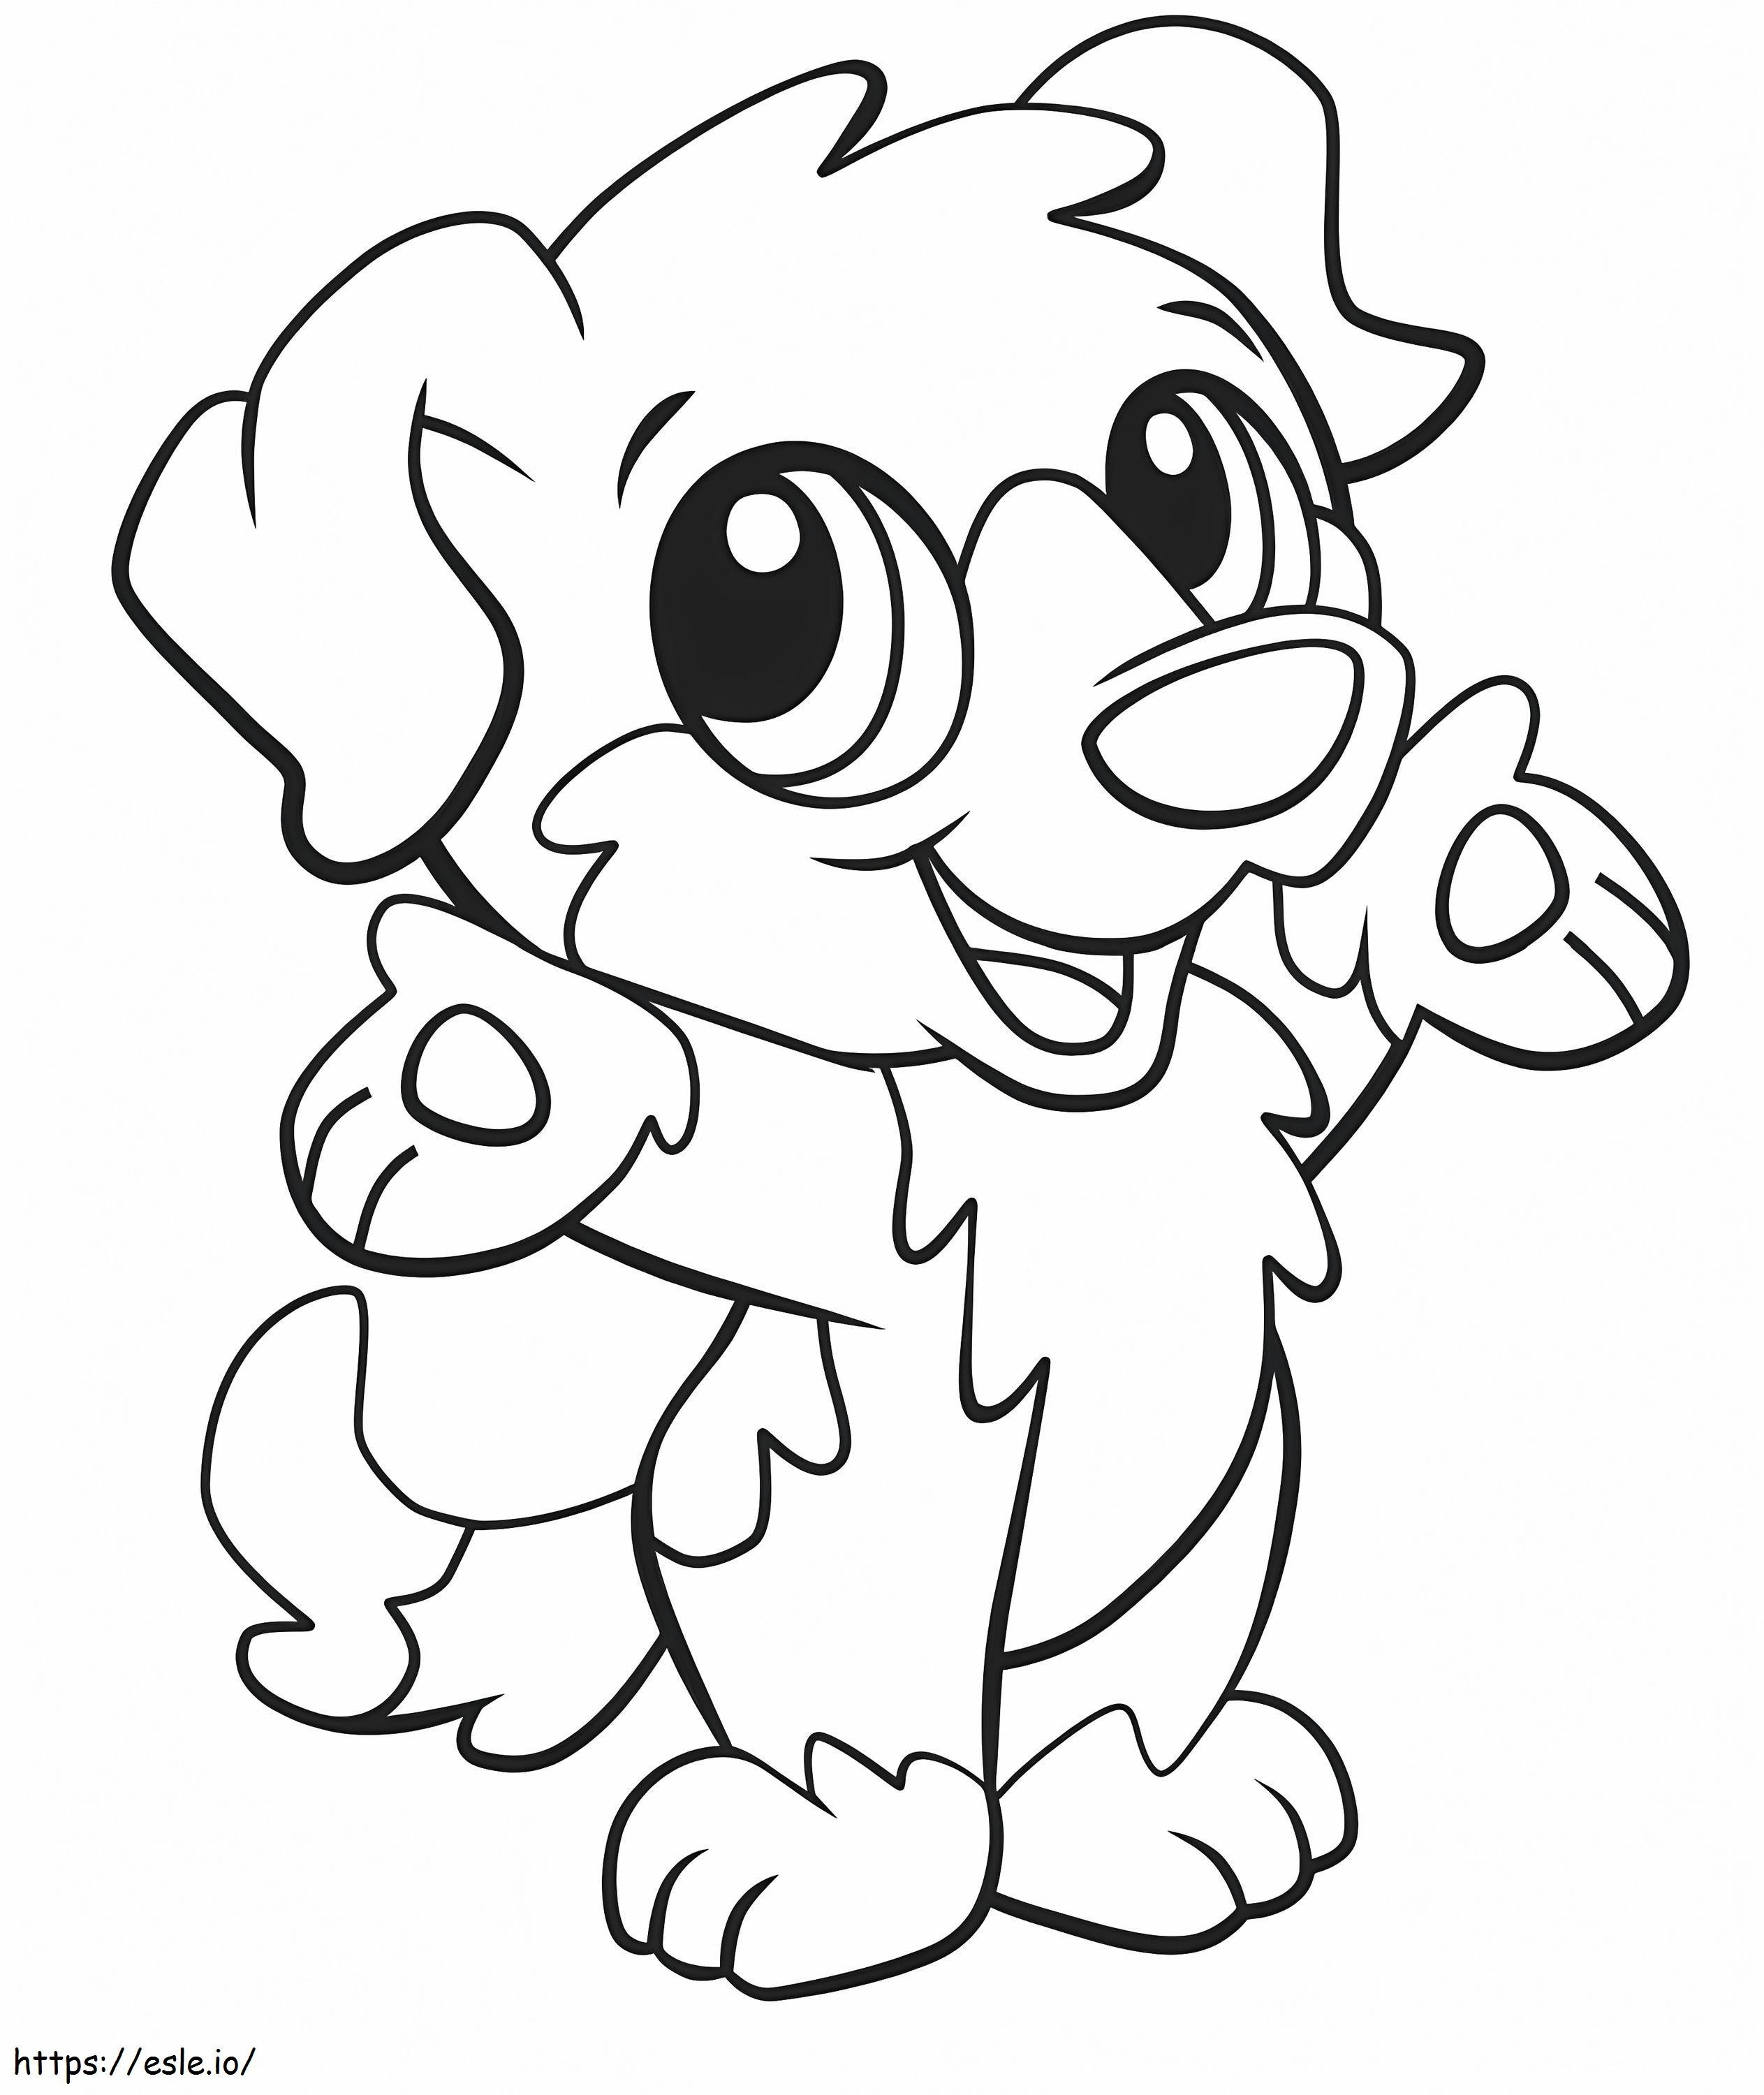 1559984667 Dog A4 coloring page